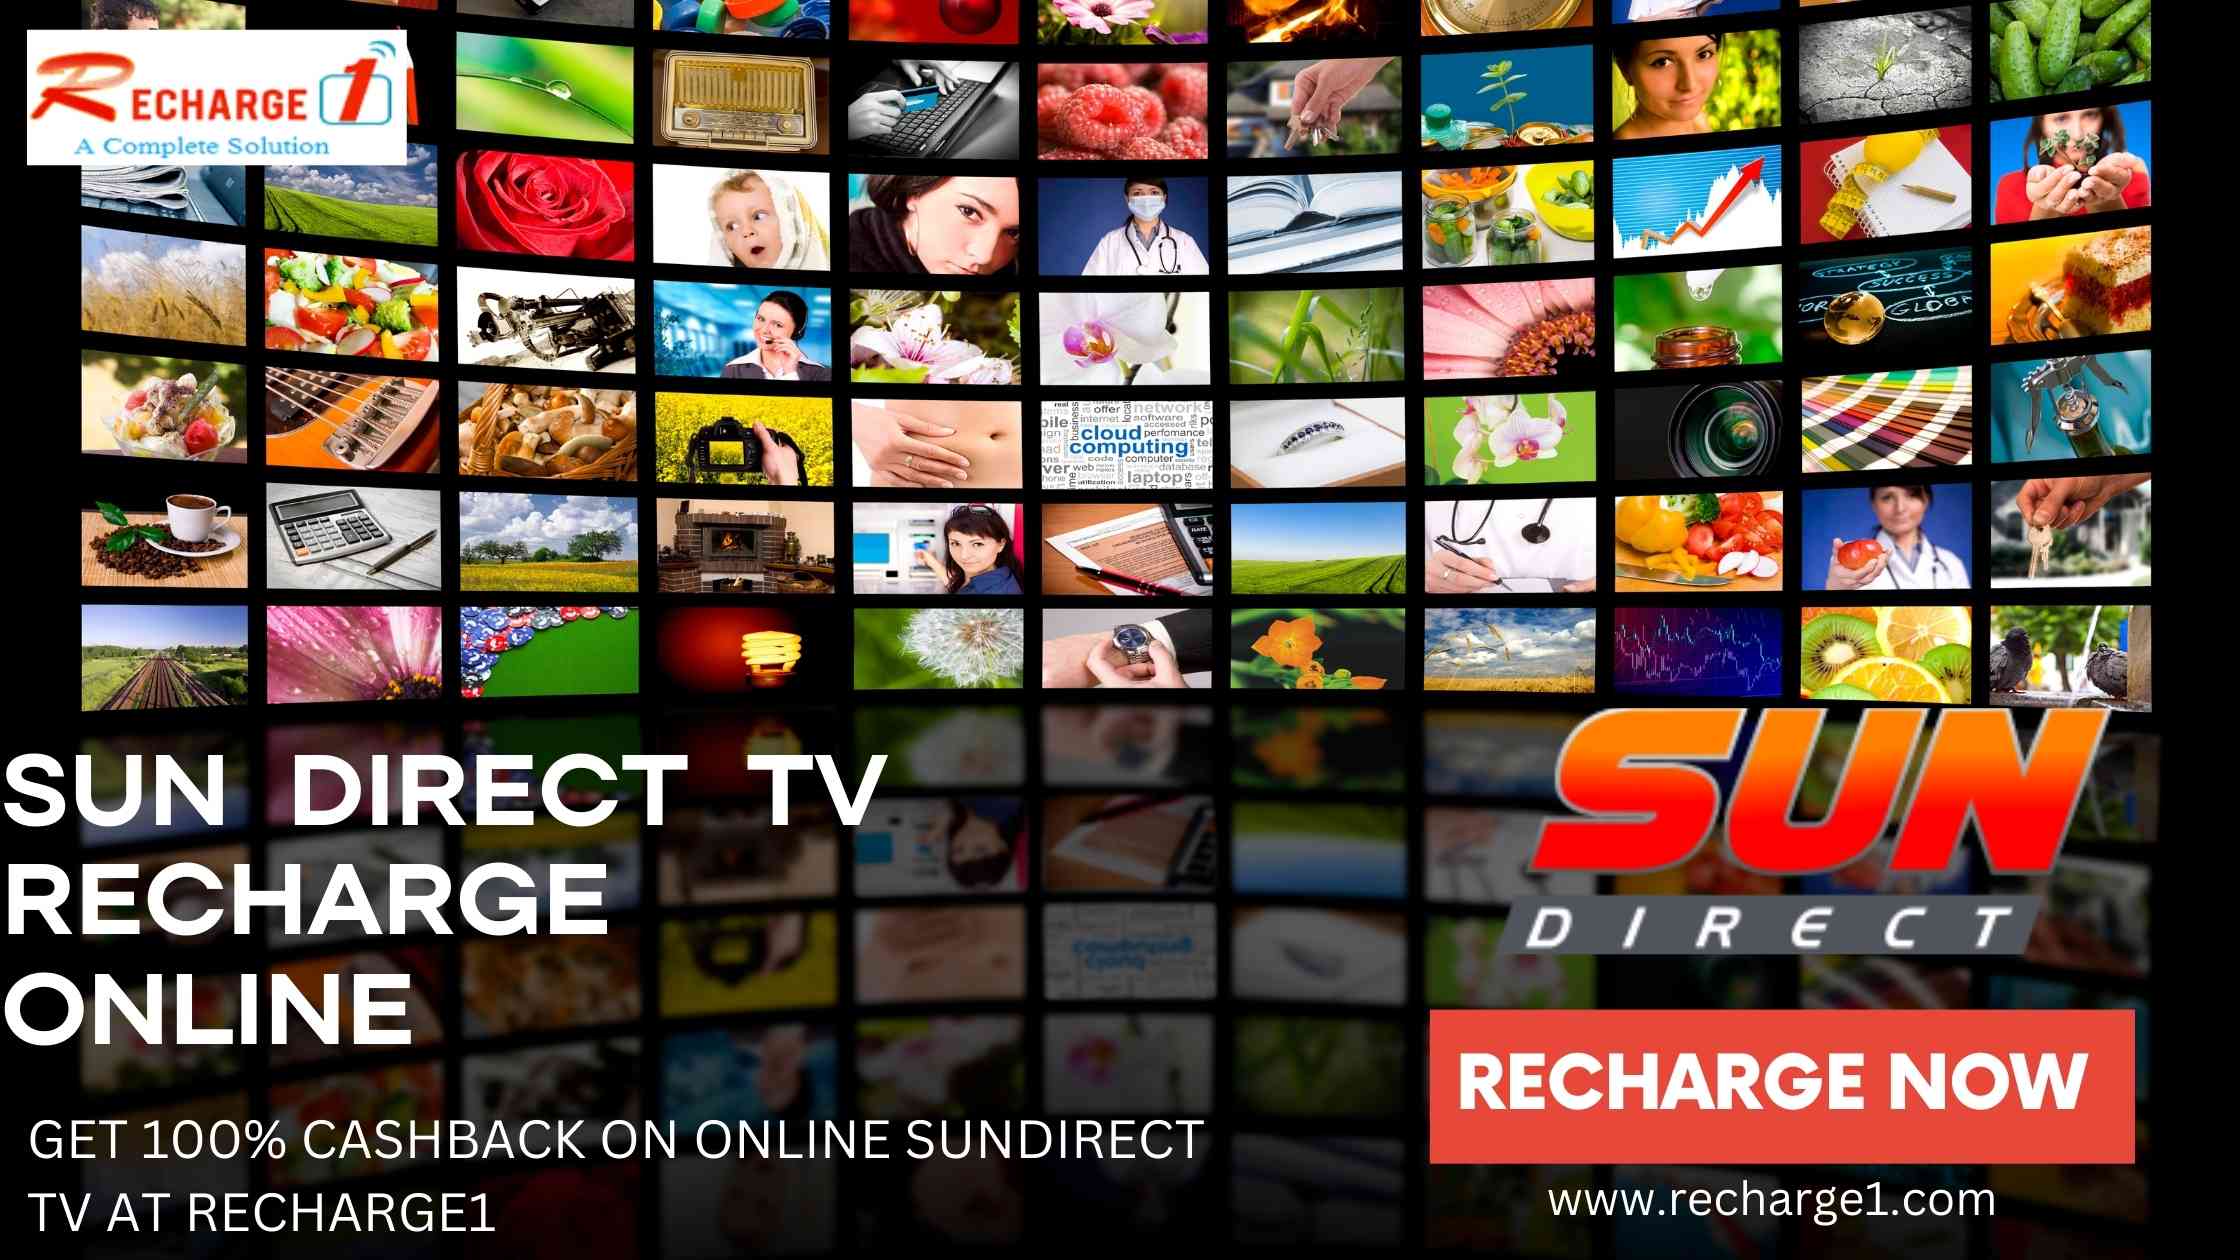 Sun Direct TV RechargeOtherAnnouncementsAll Indiaother